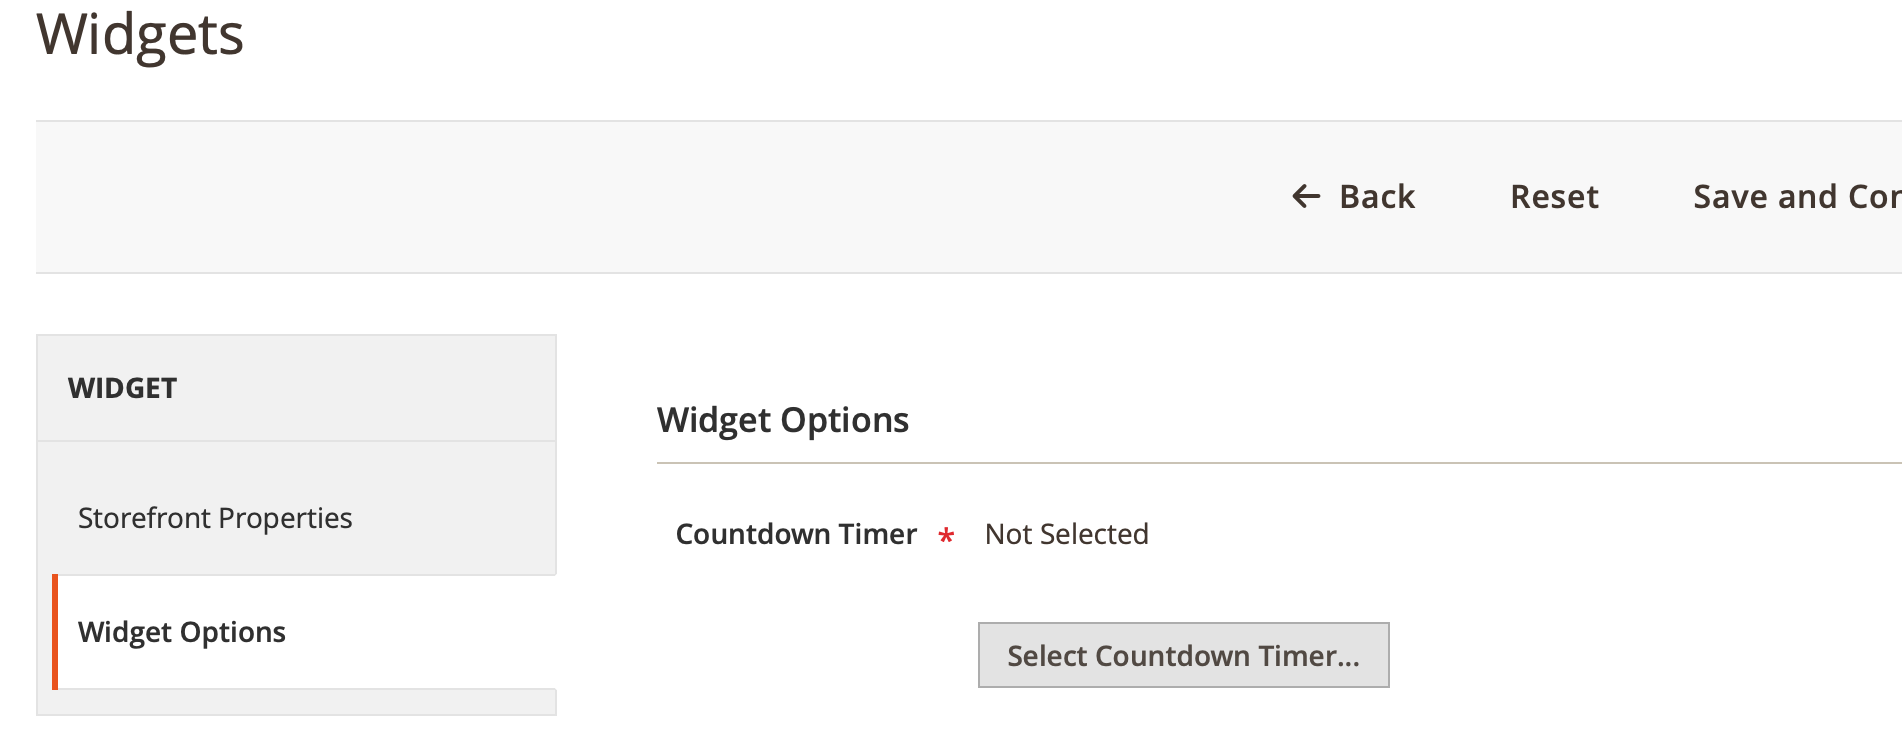 Magento 2 Product Countdown Timers